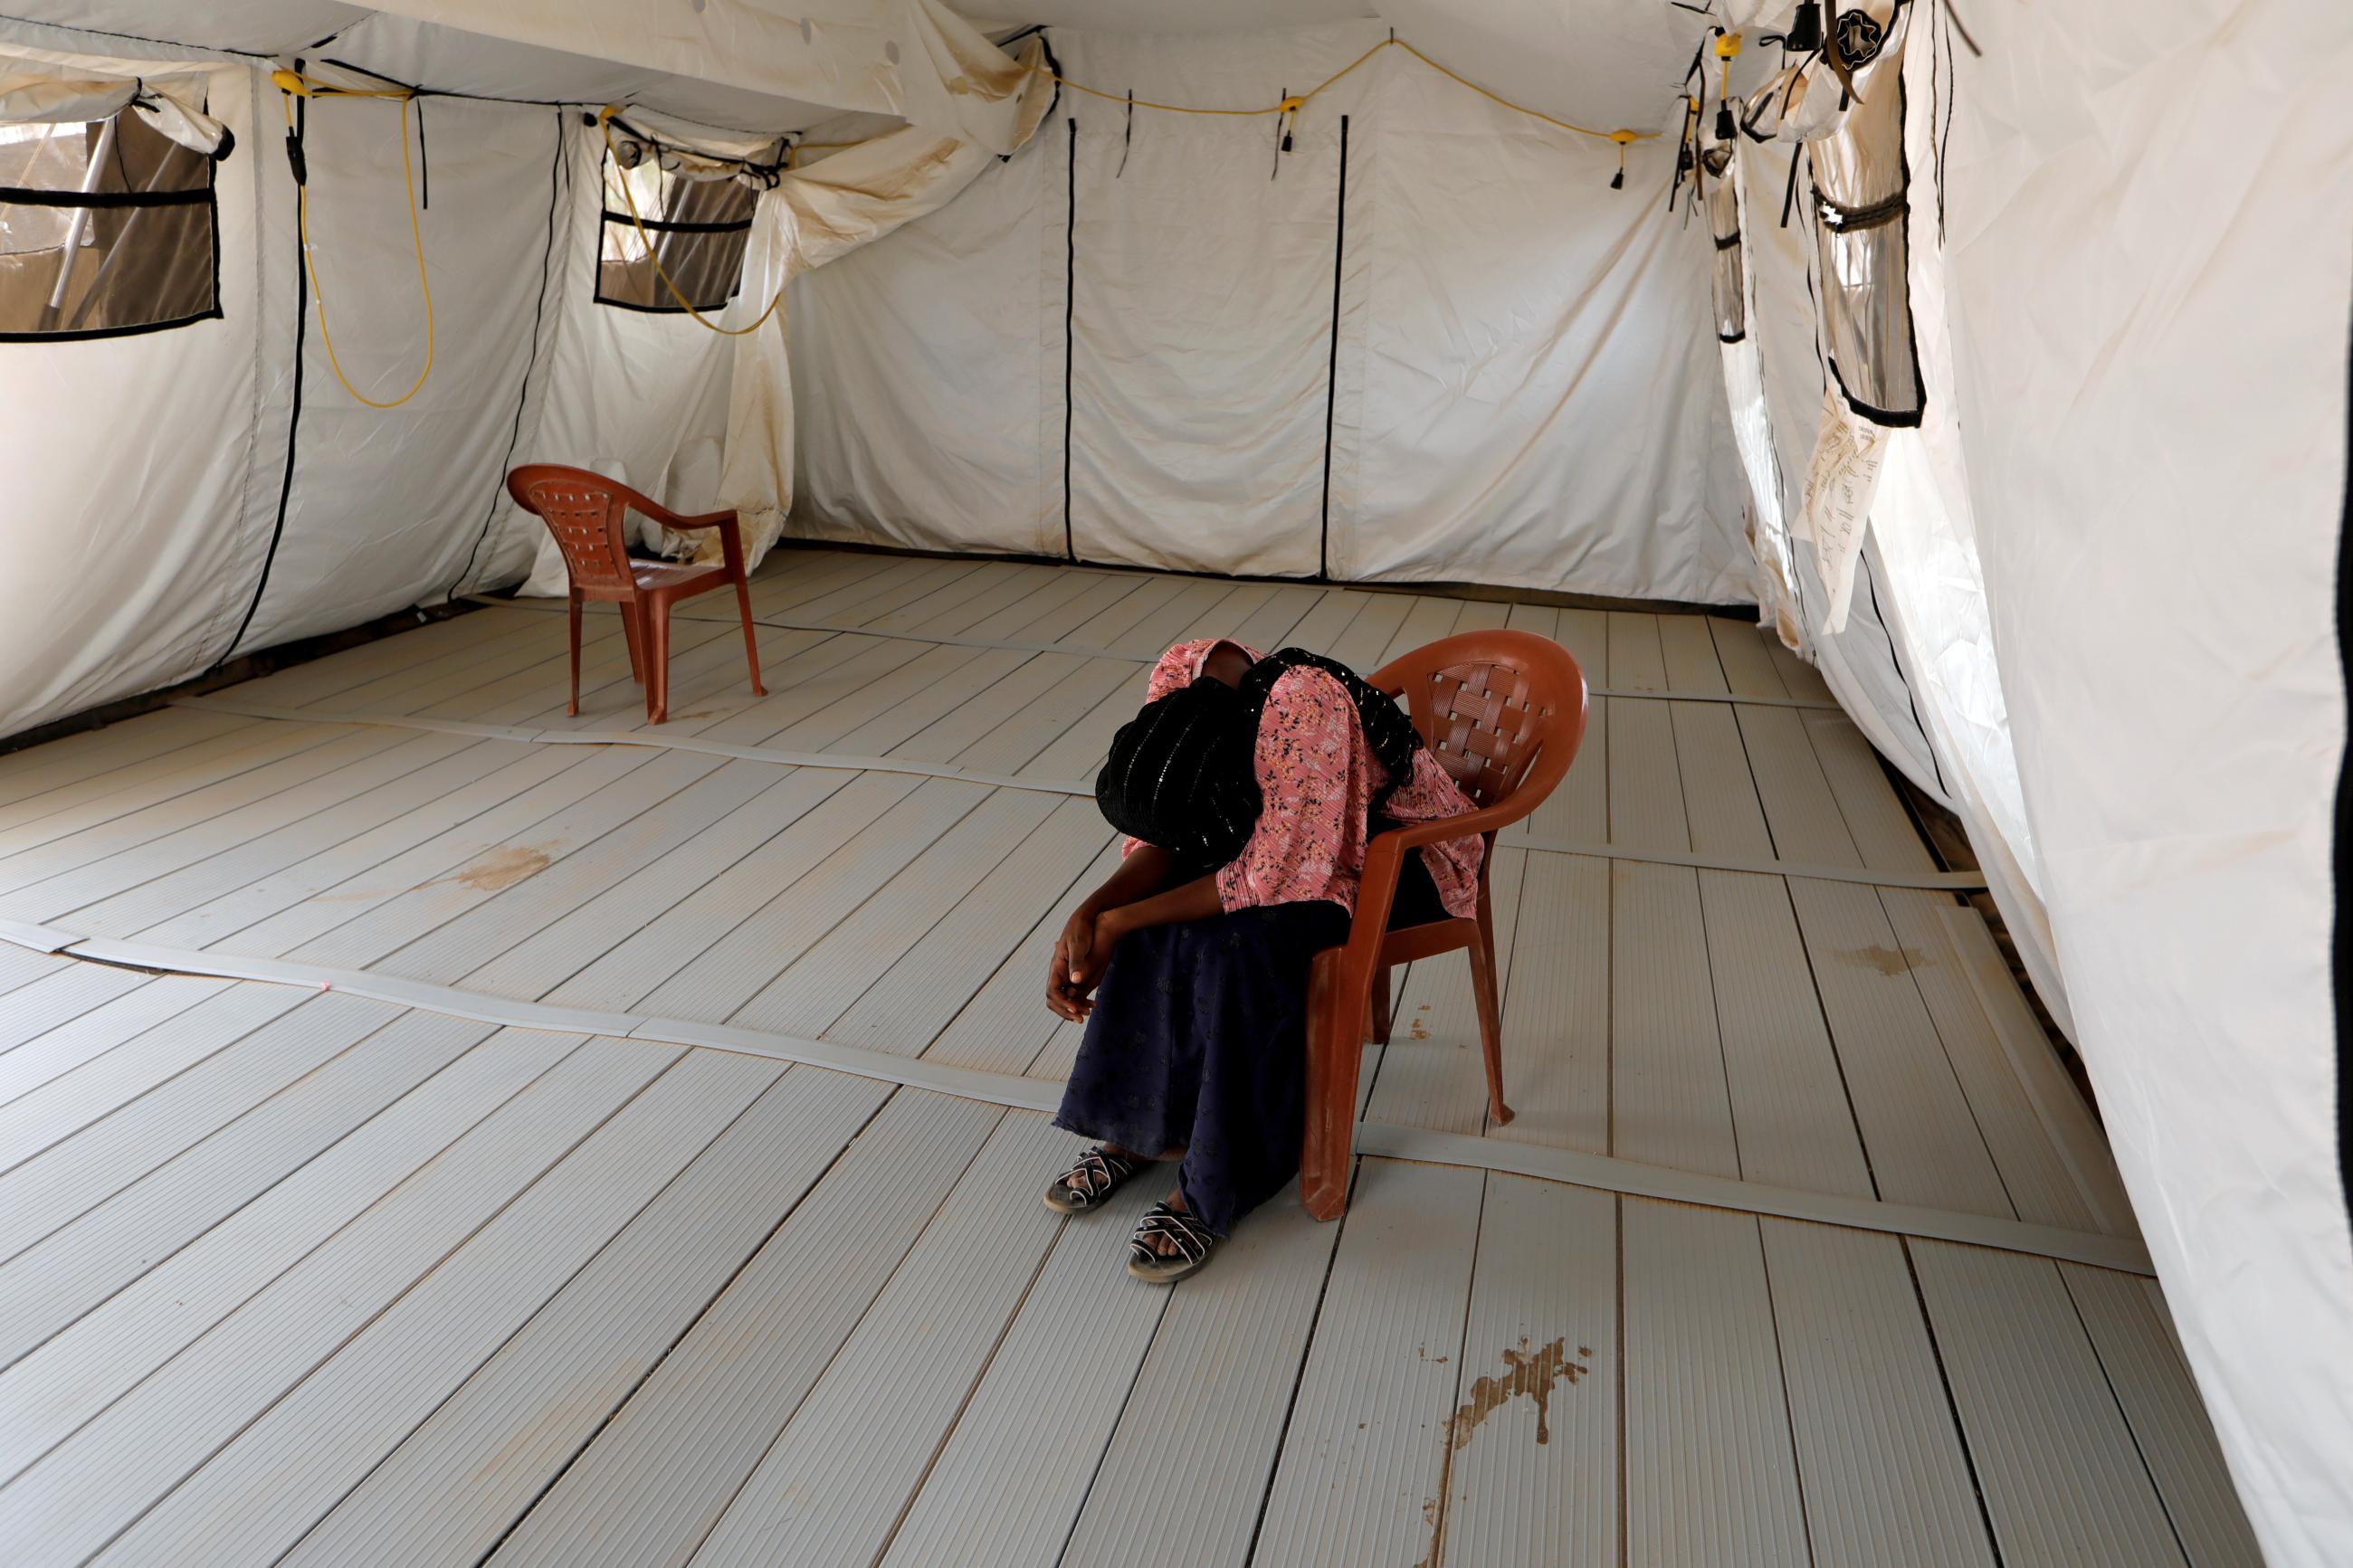 A local resident waits to be examined after she was isolated due to the symptoms of the coronavirus disease (COVID-19), inside an isolation tent for suspected cases at the army field hospital in Touba, Senegal May 1, 2020.